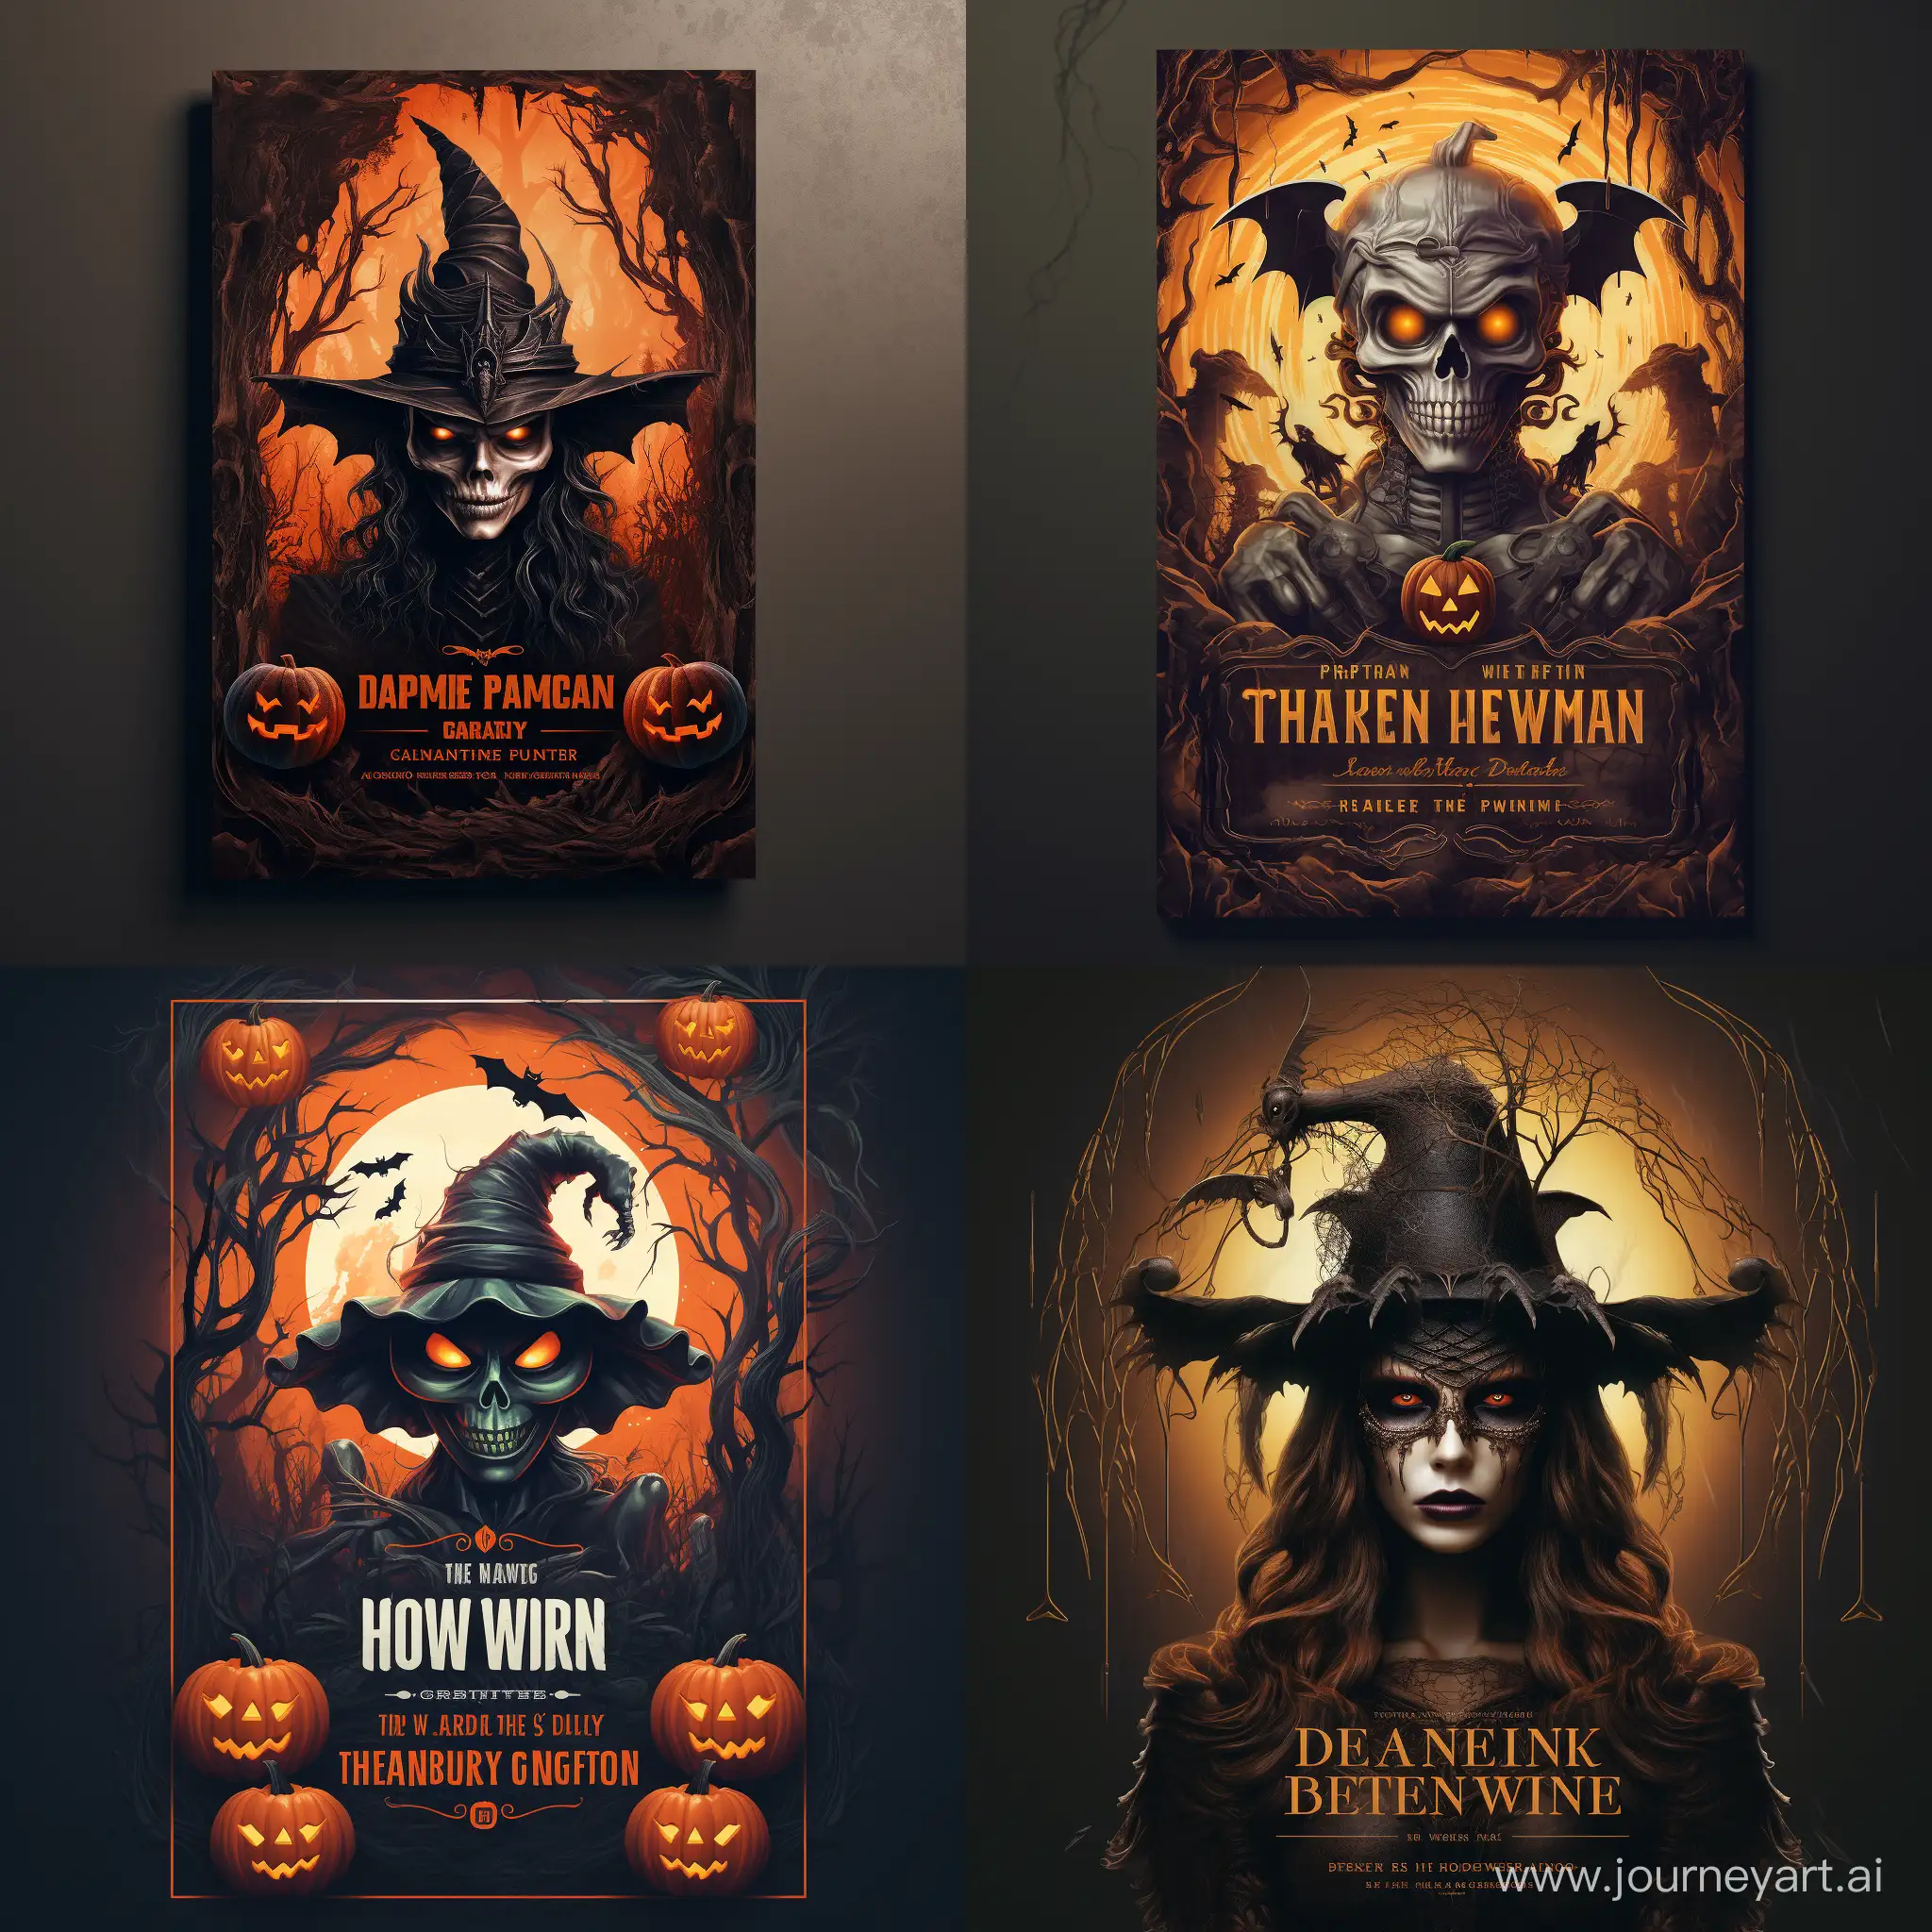 Spooky-Halloween-Night-Party-Invitation-with-Pumpkin-Decorations-and-Witch-Silhouettes